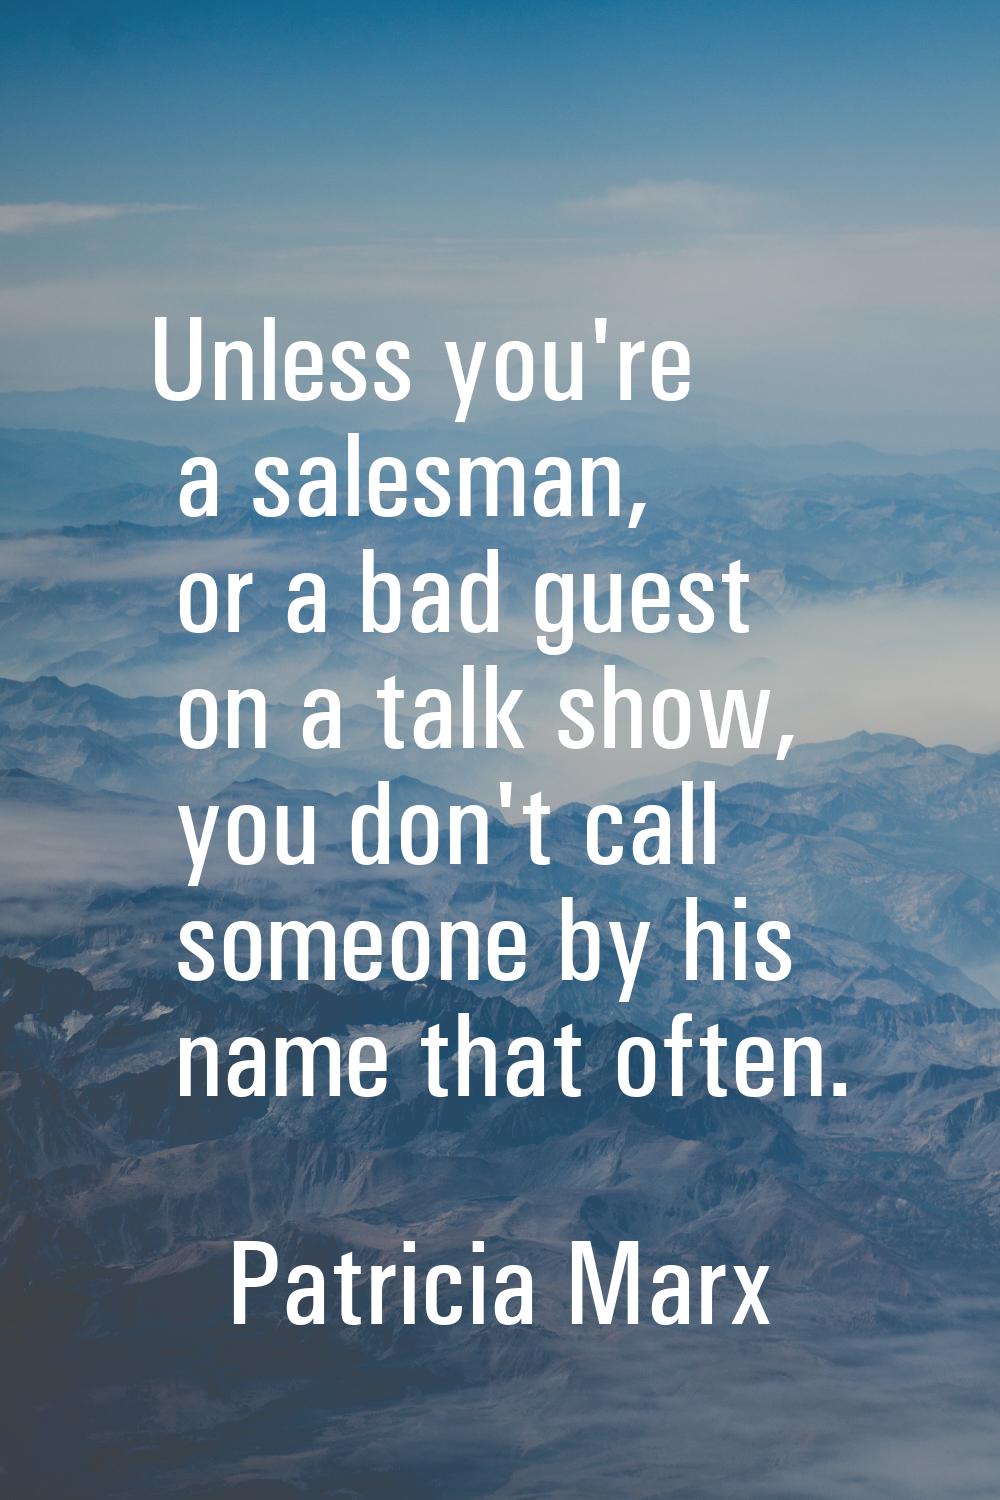 Unless you're a salesman, or a bad guest on a talk show, you don't call someone by his name that of